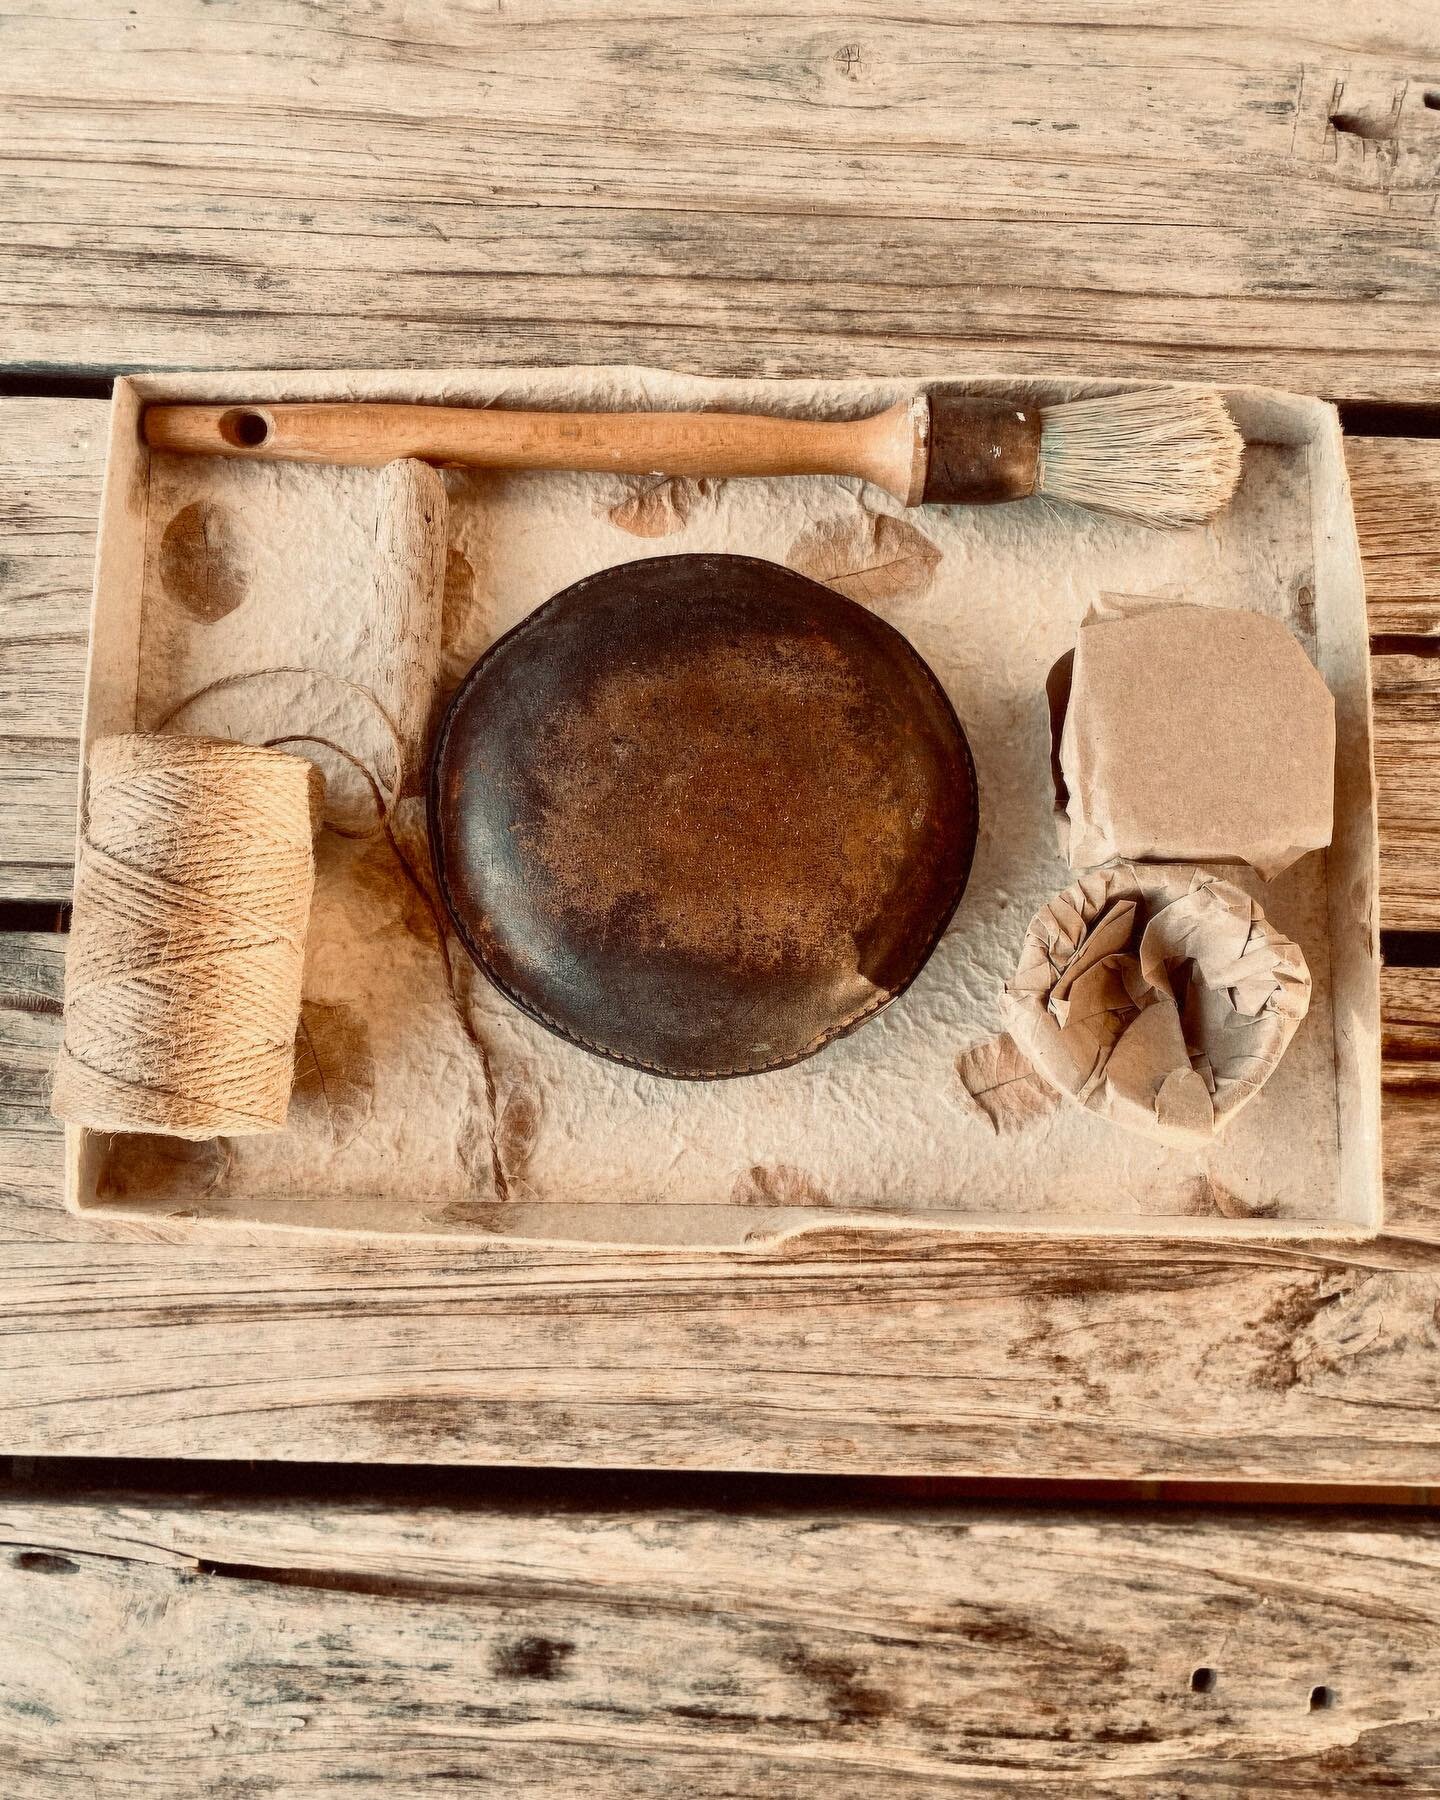 A box of necessities. Completely unstyled, this is an old box lid into which I think Ben, or anyone, has placed things that belong to me. A brush, an artists elbow support, a piece of driftwood, two brown paper packages, some string. A lid made of mu